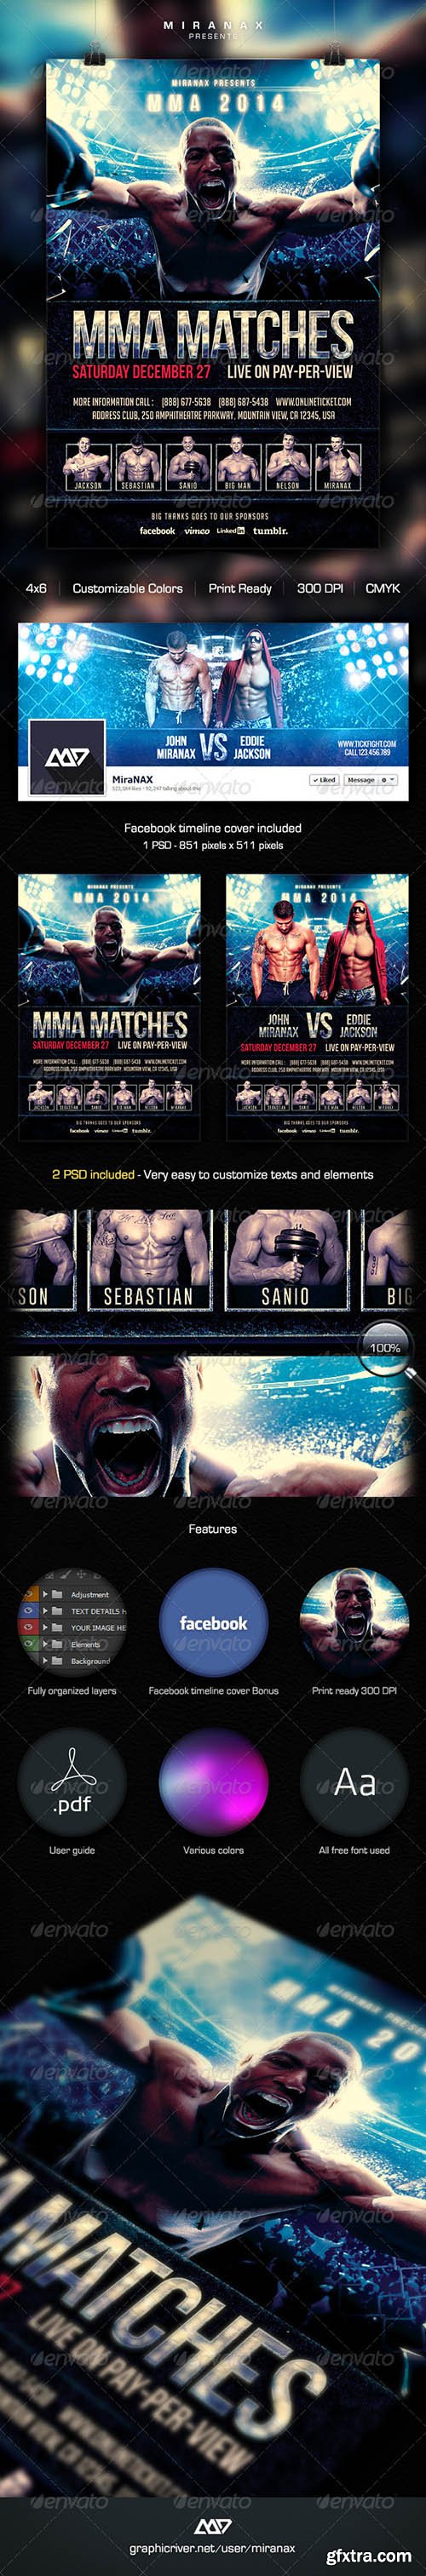 Graphicriver MMA / UFC / Boxing Fight Flyer Template 6002393